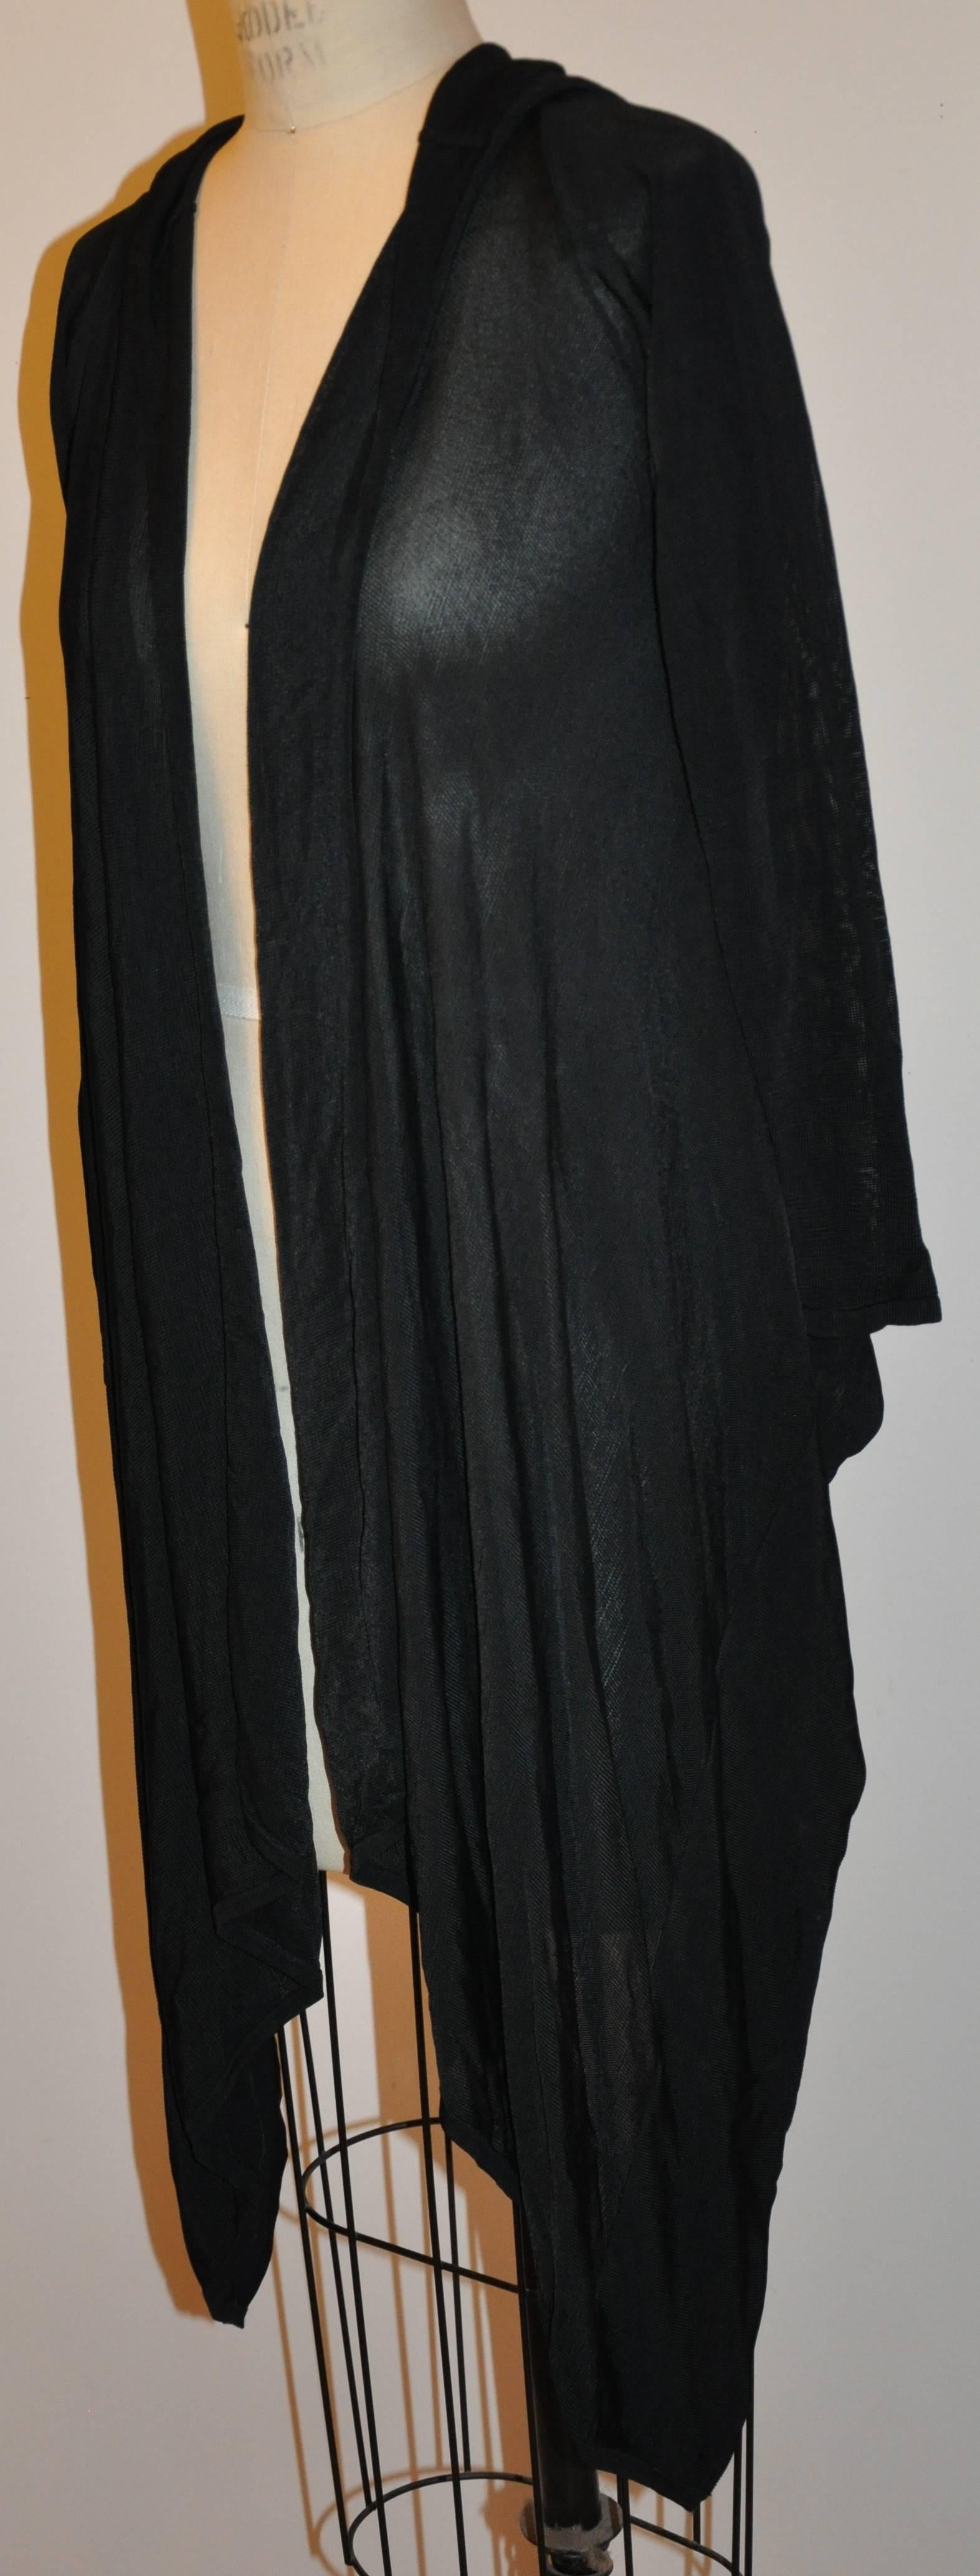        Herve Leger black asymmetric cut black jersey open cardigan draped wonderfully over the bodice when wearing. The length in back measures 22